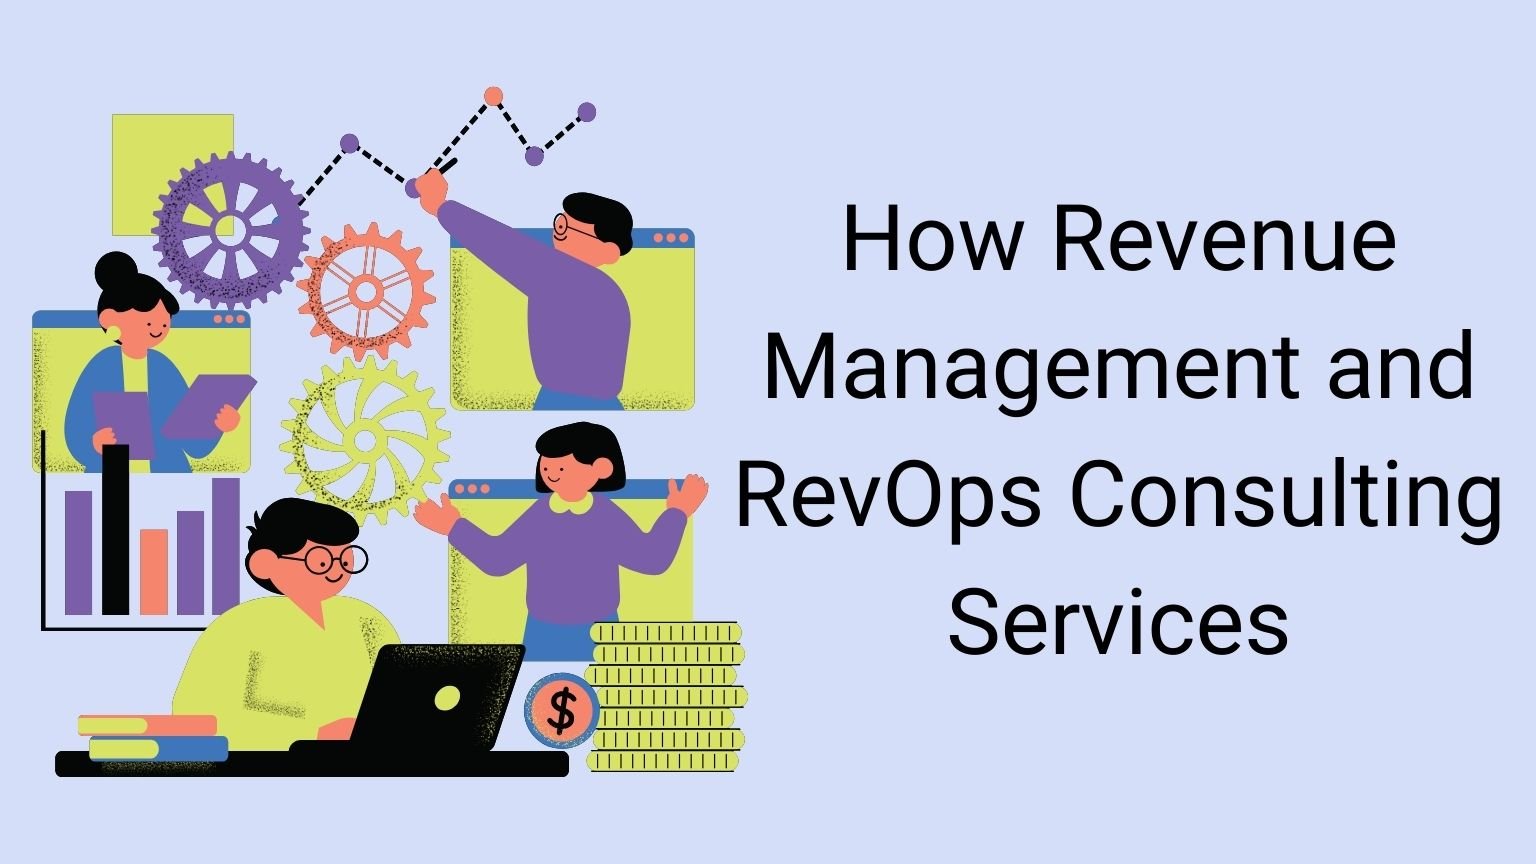 RevOps Consulting Services